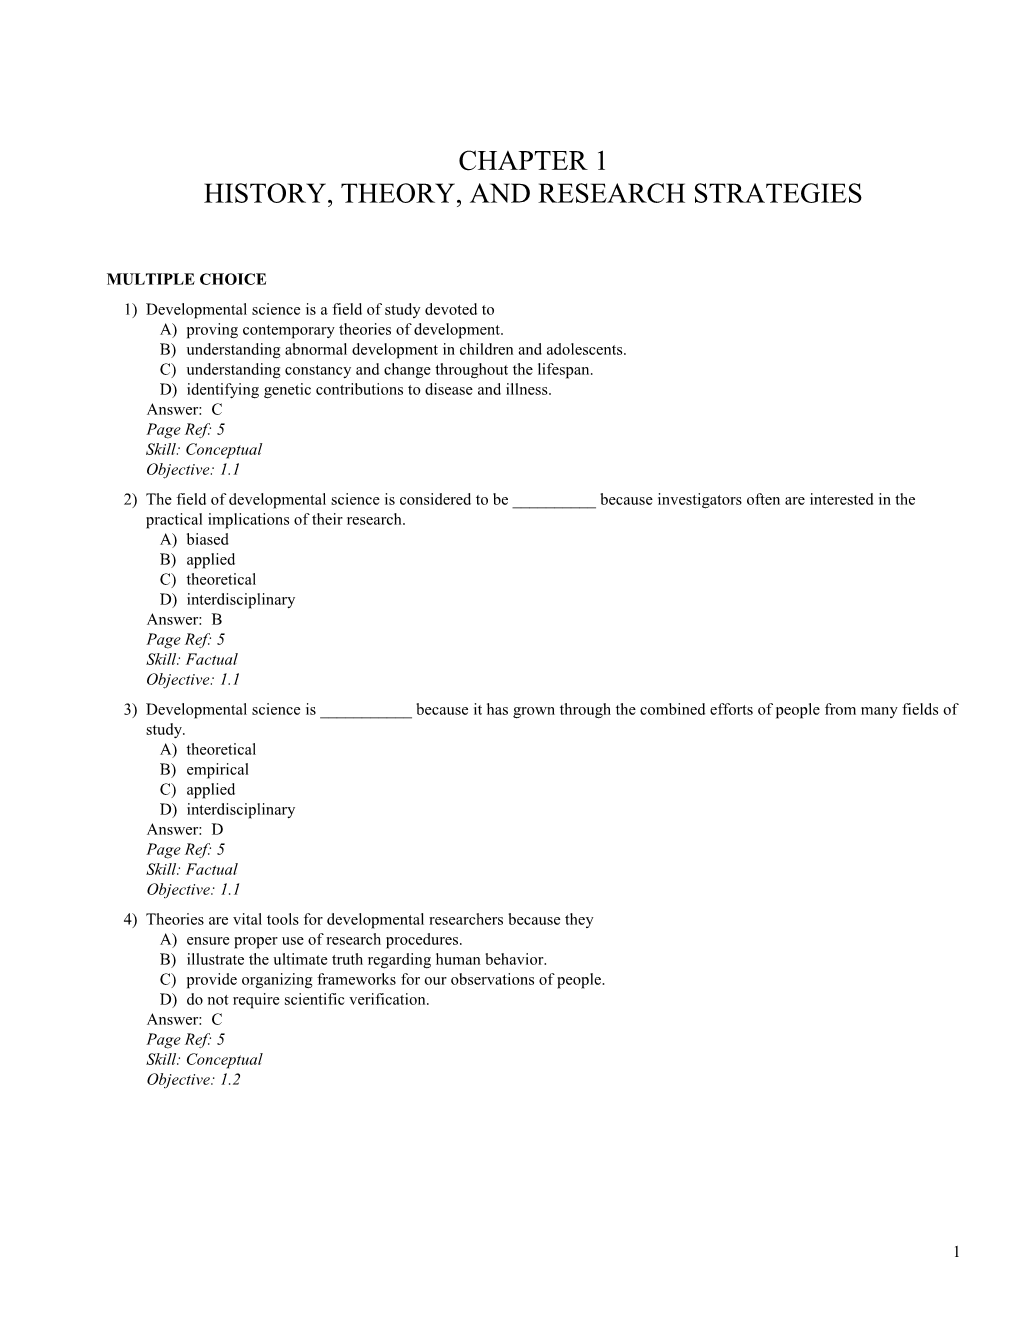 Chapter 1 History, Theory, and Research Strategies